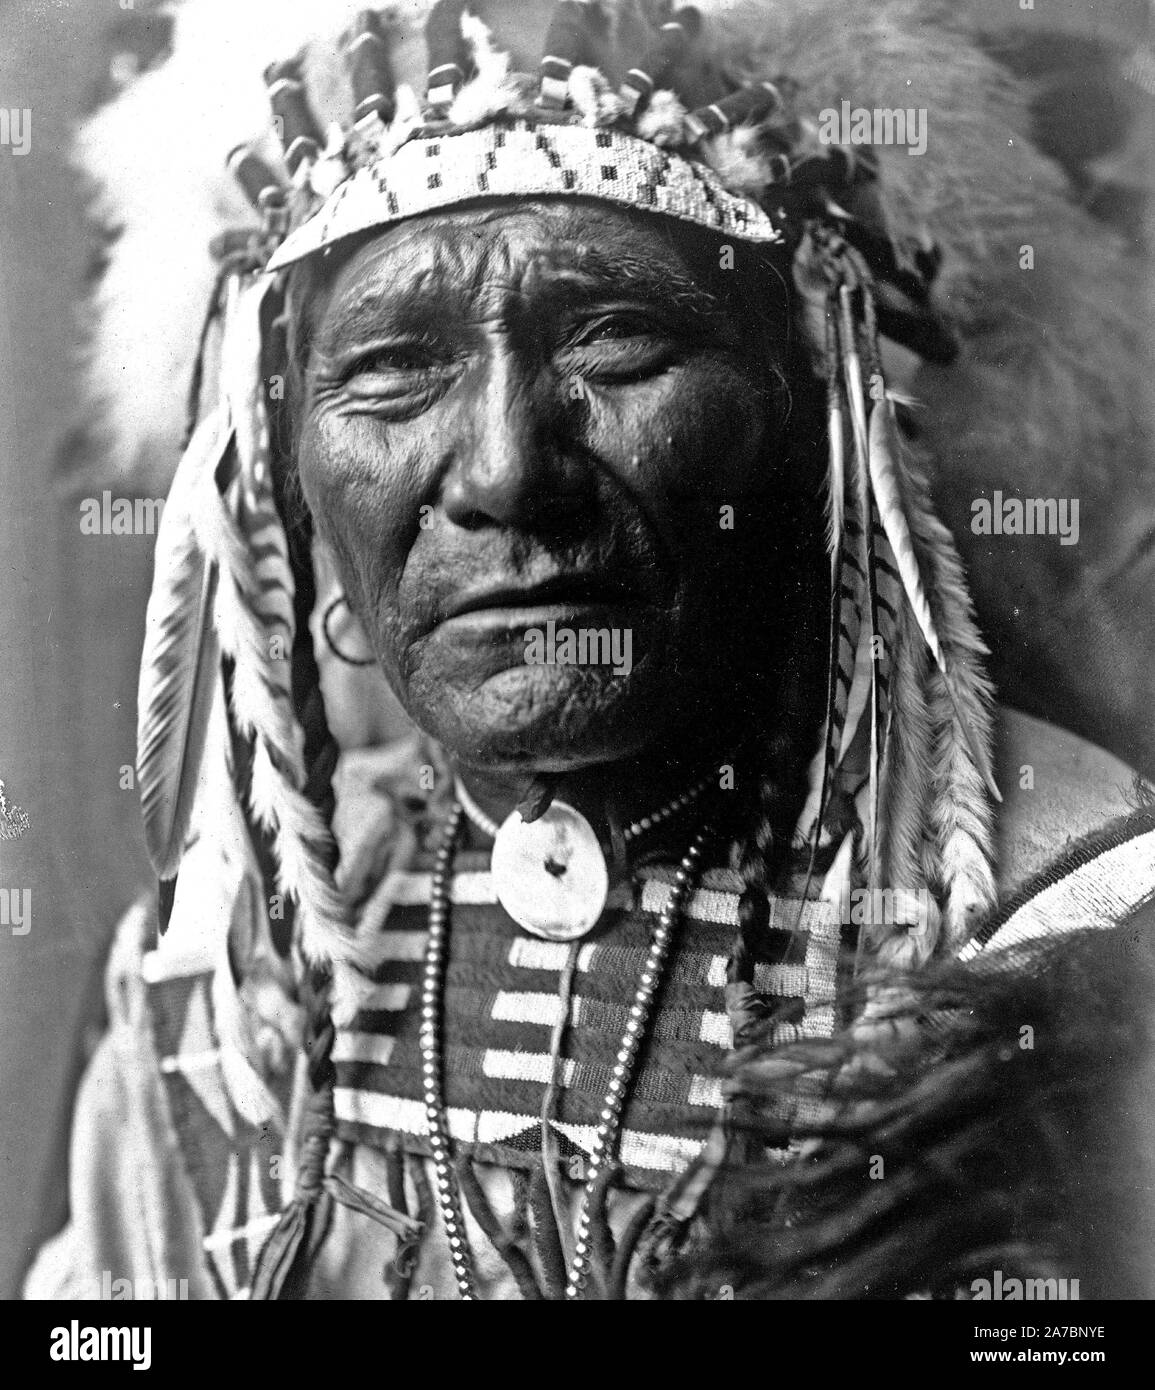 Edward S. Curtis Native American Indians - Ghost Bear, Crow Indian, Montana Ca. 1908 Stockfoto